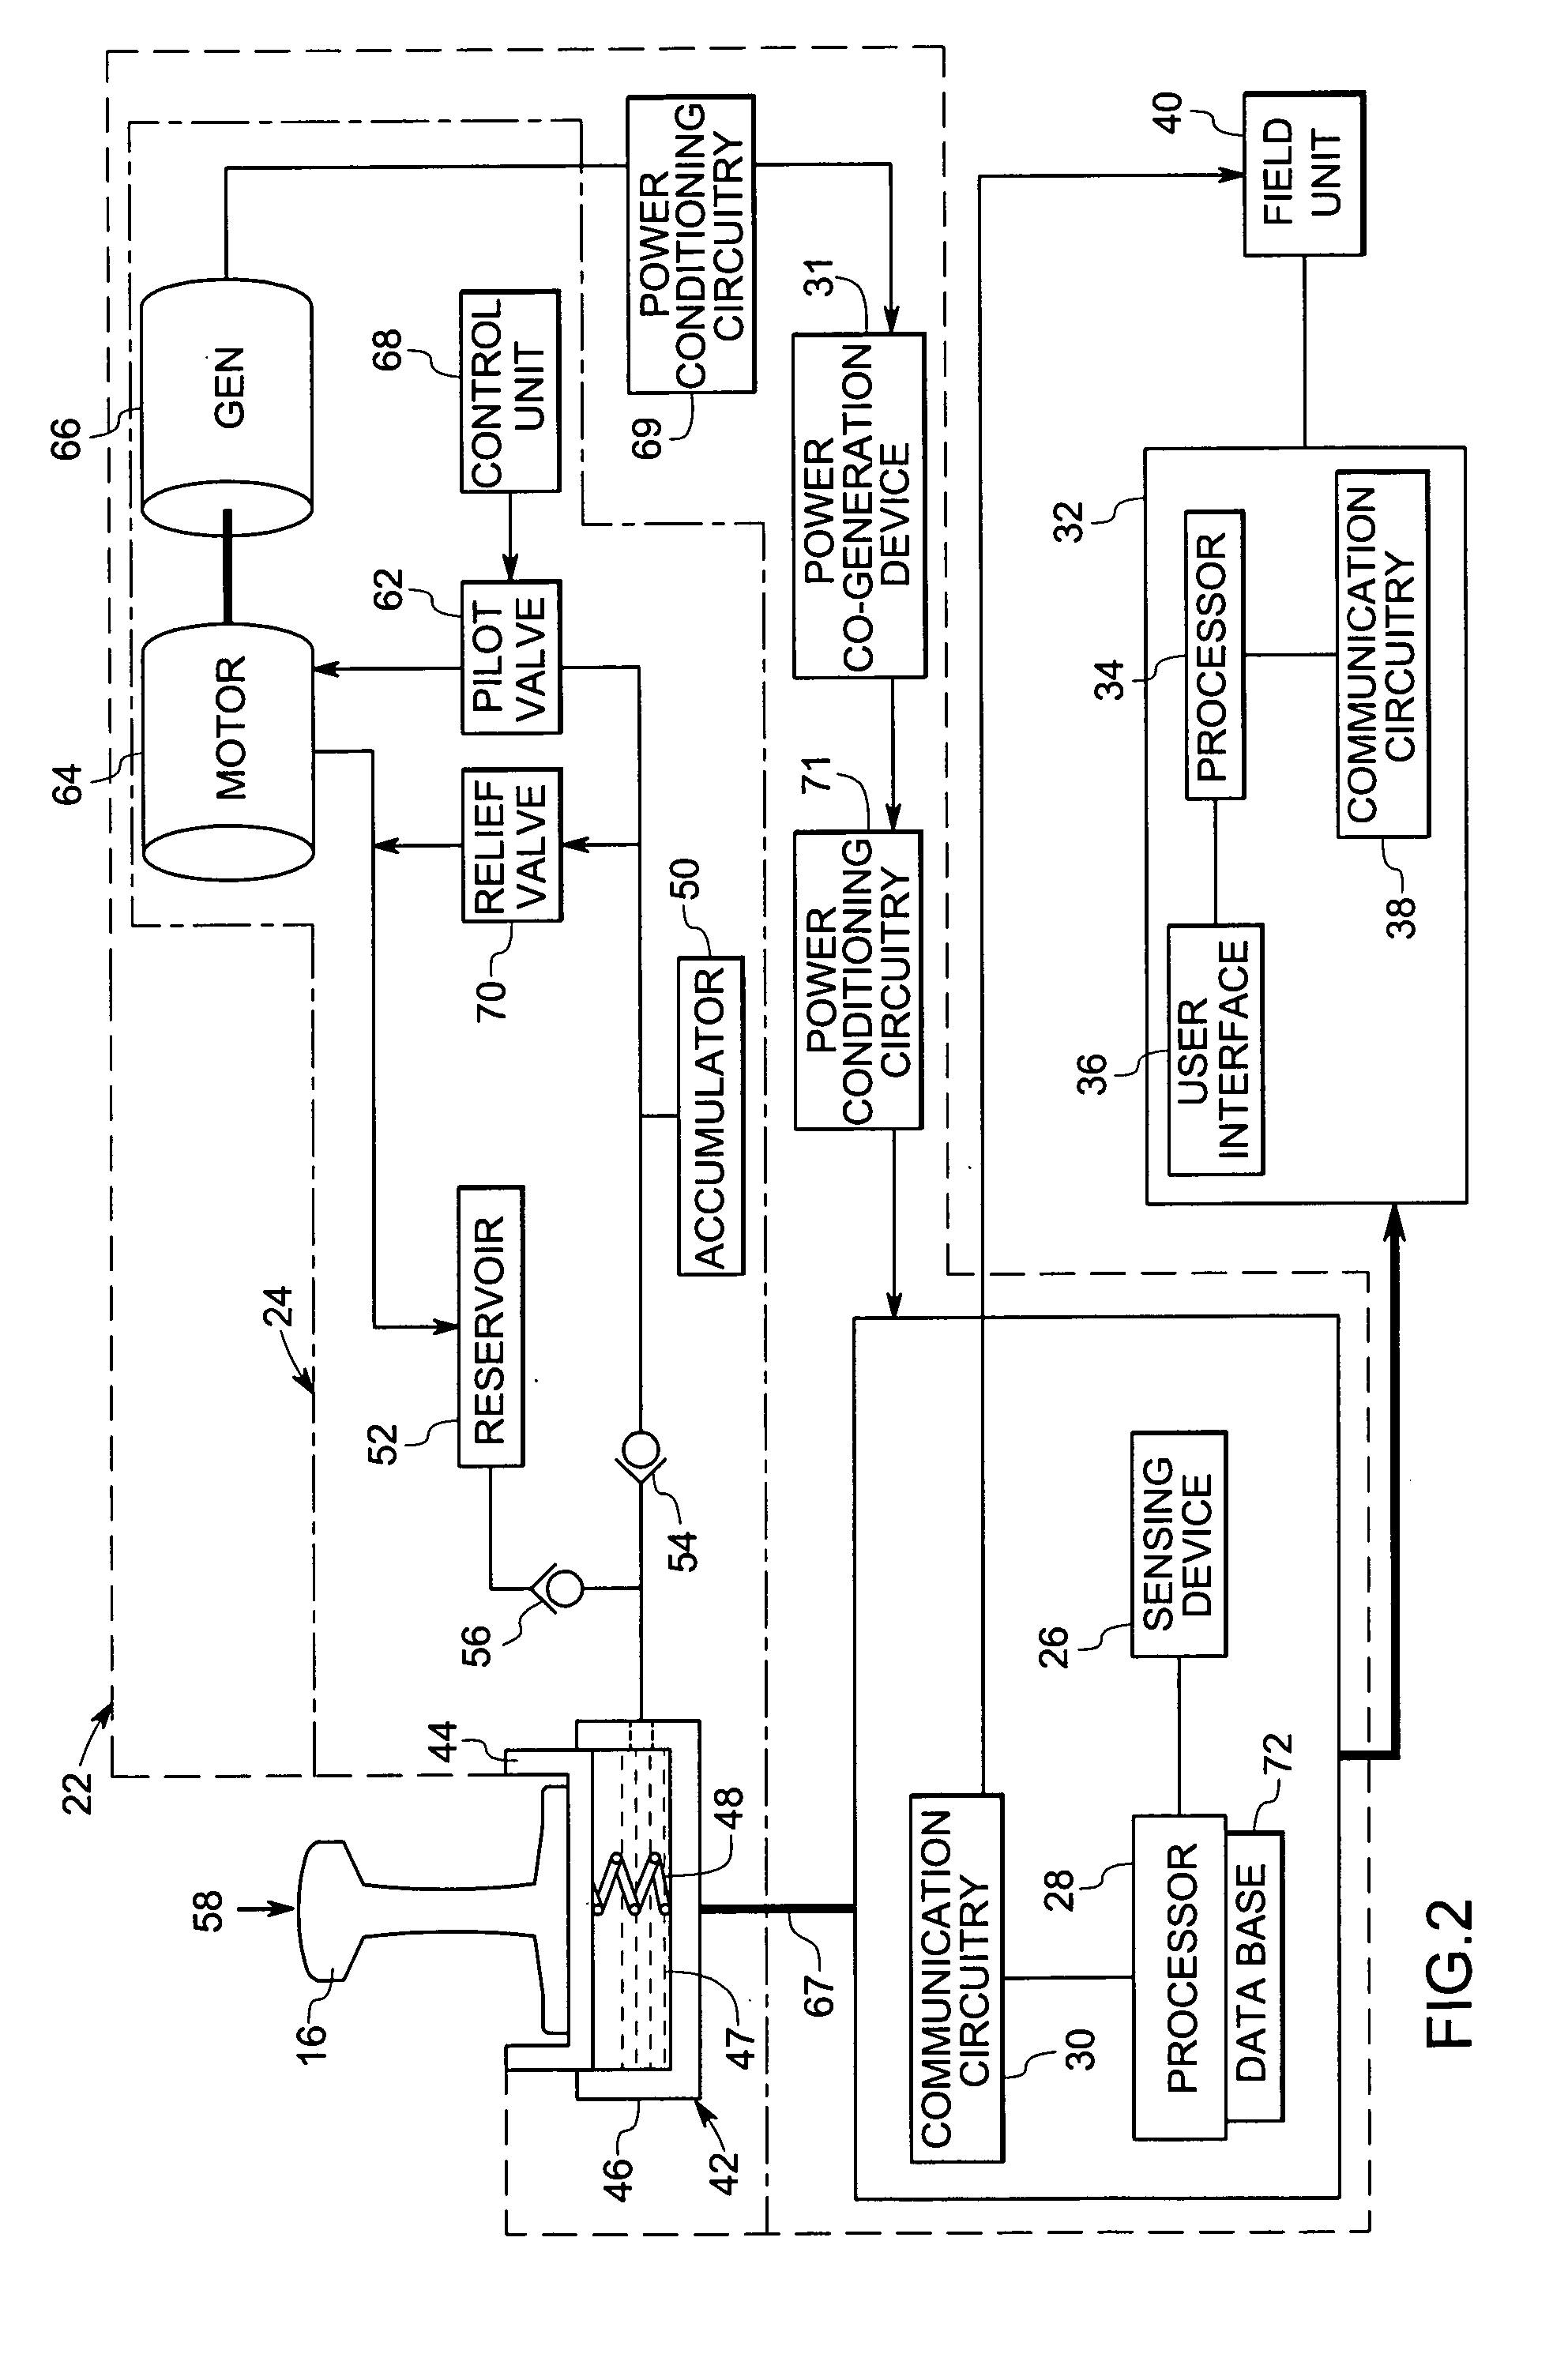 Rail based electric power generation system